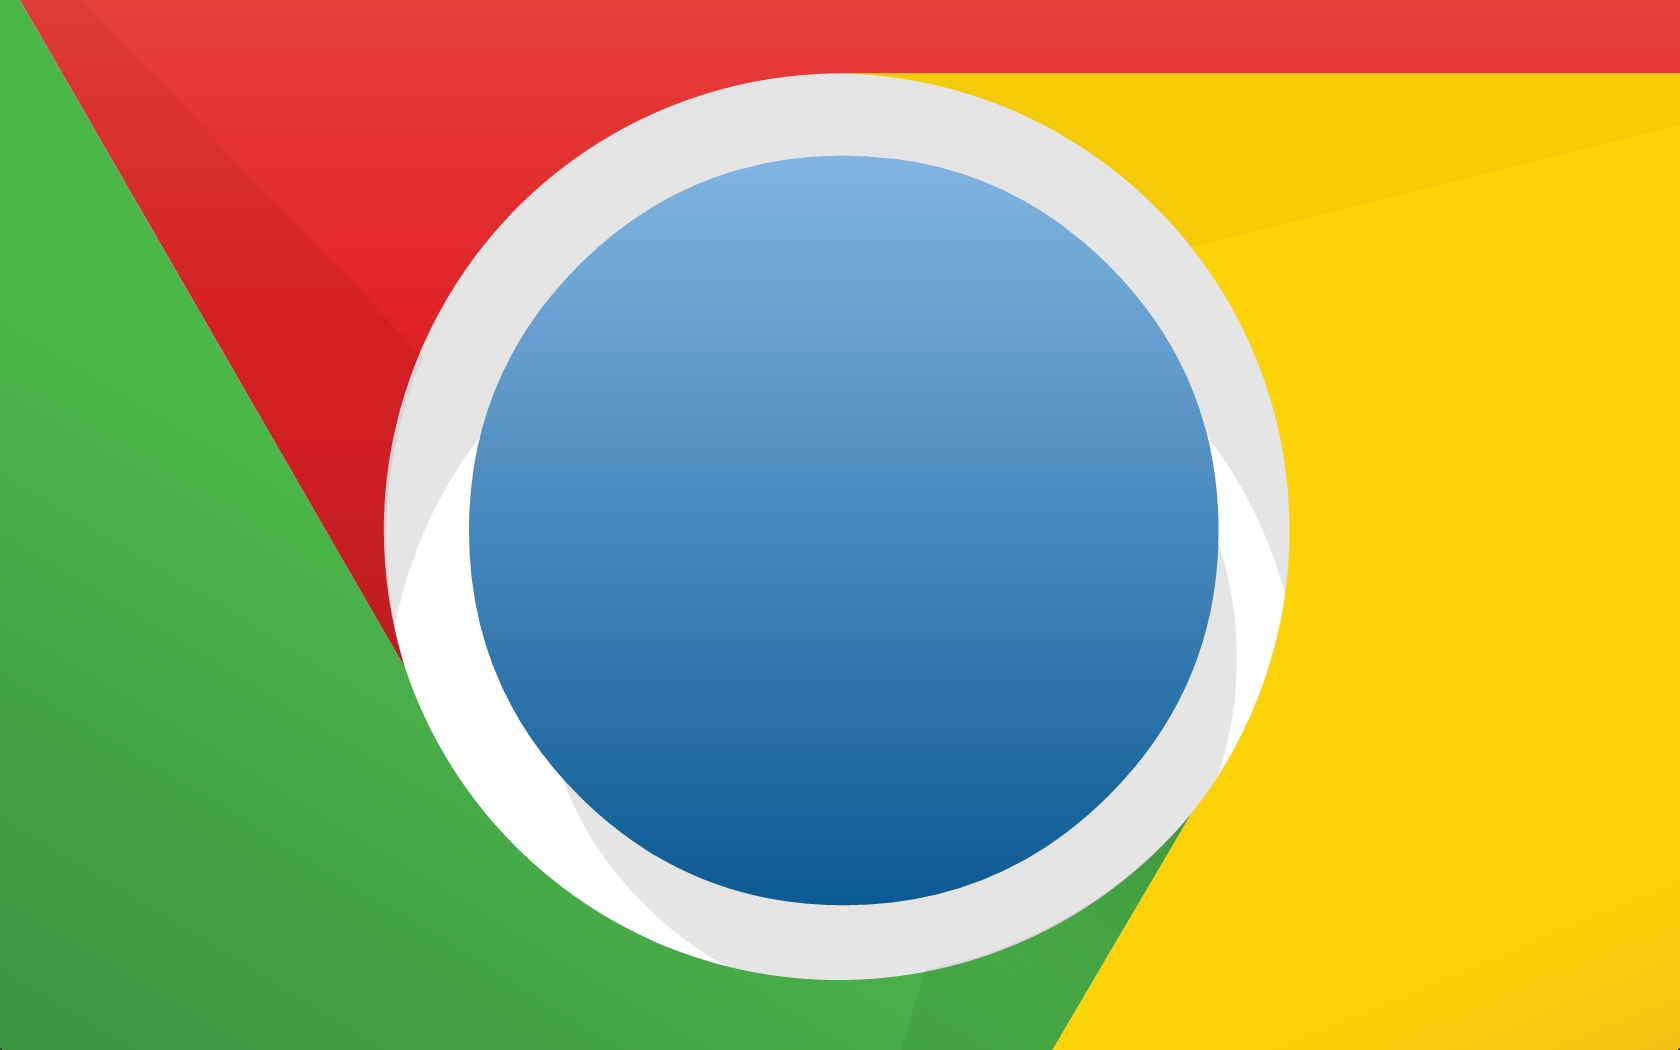 New Chrome update lets you easily mute autoplay videos, stops malicious redirects, and more